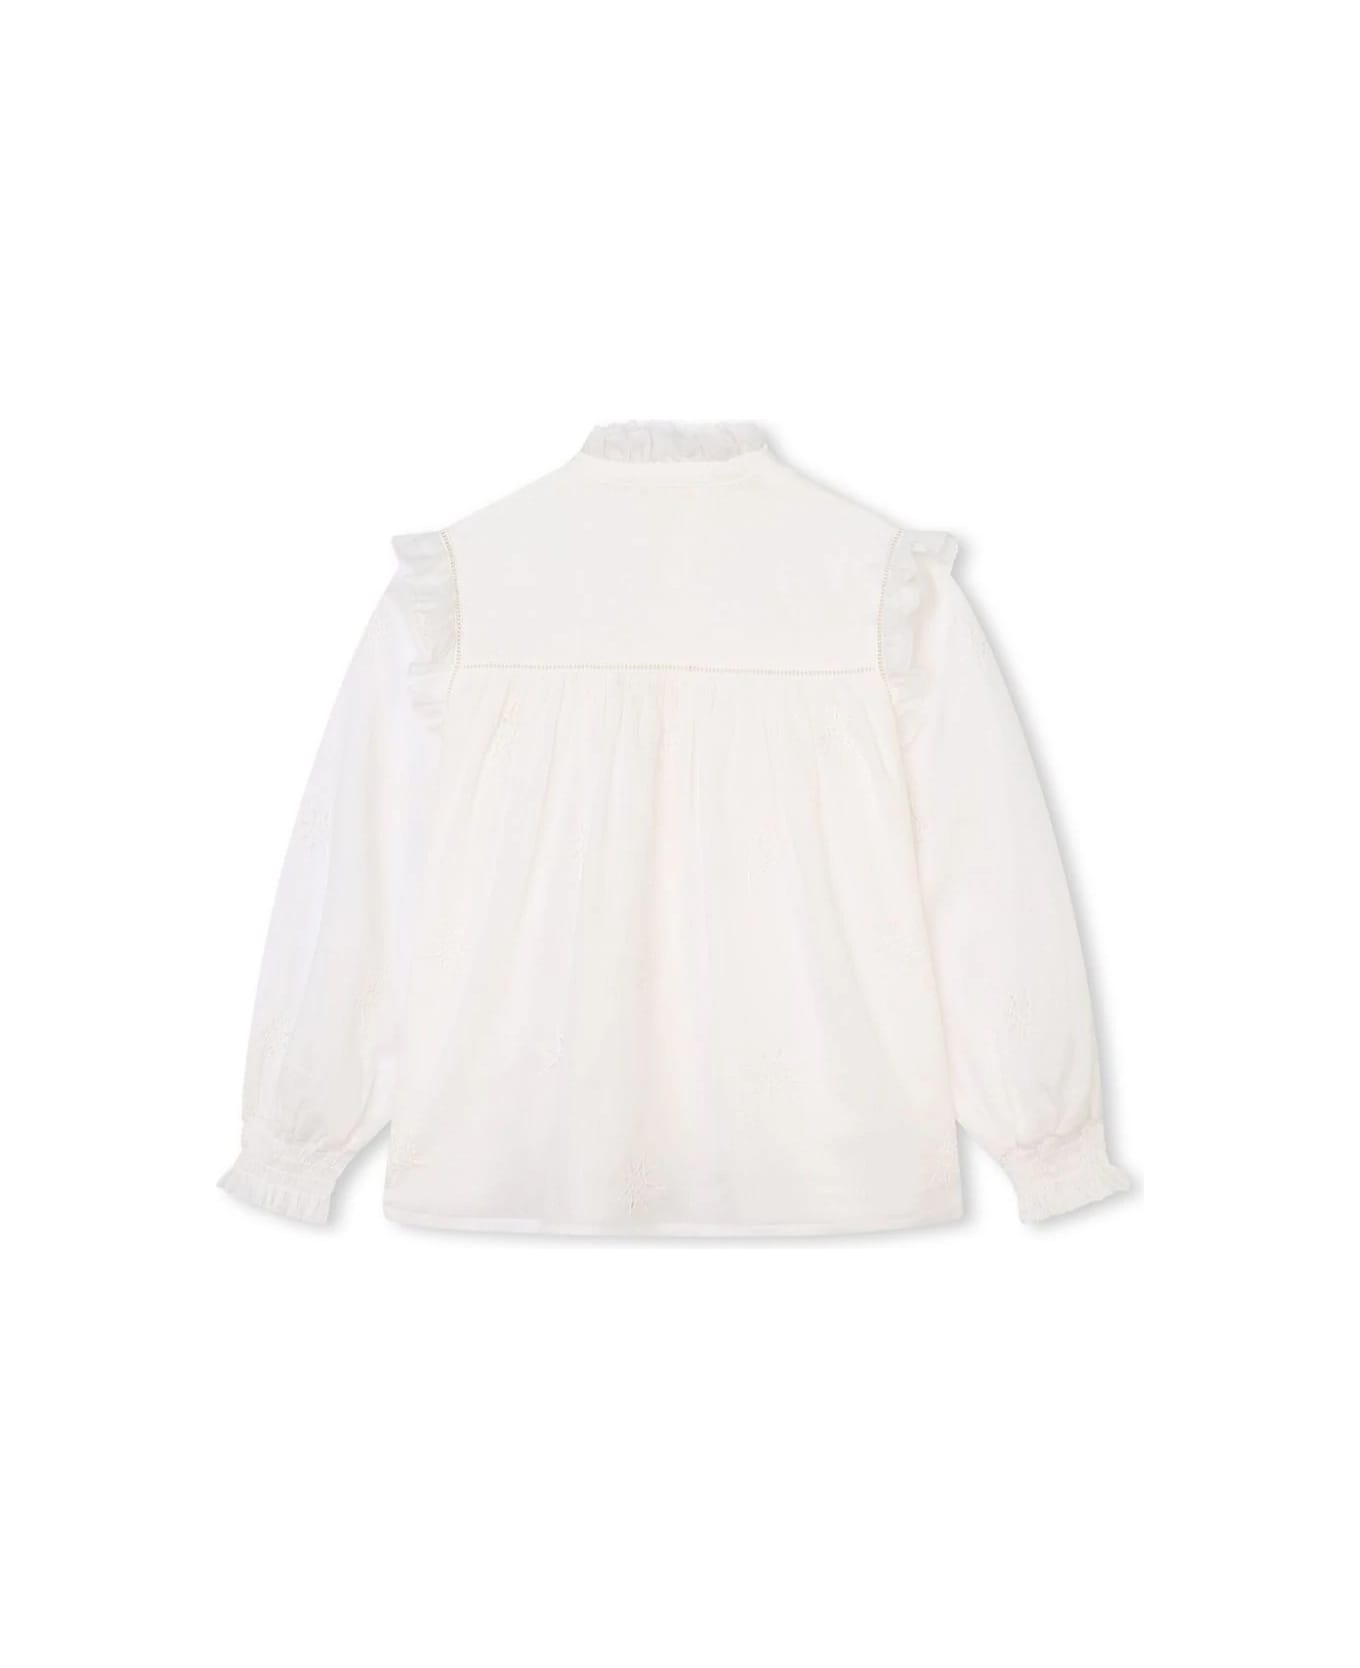 Chloé White Shirt With All-over Star Embroidery - White